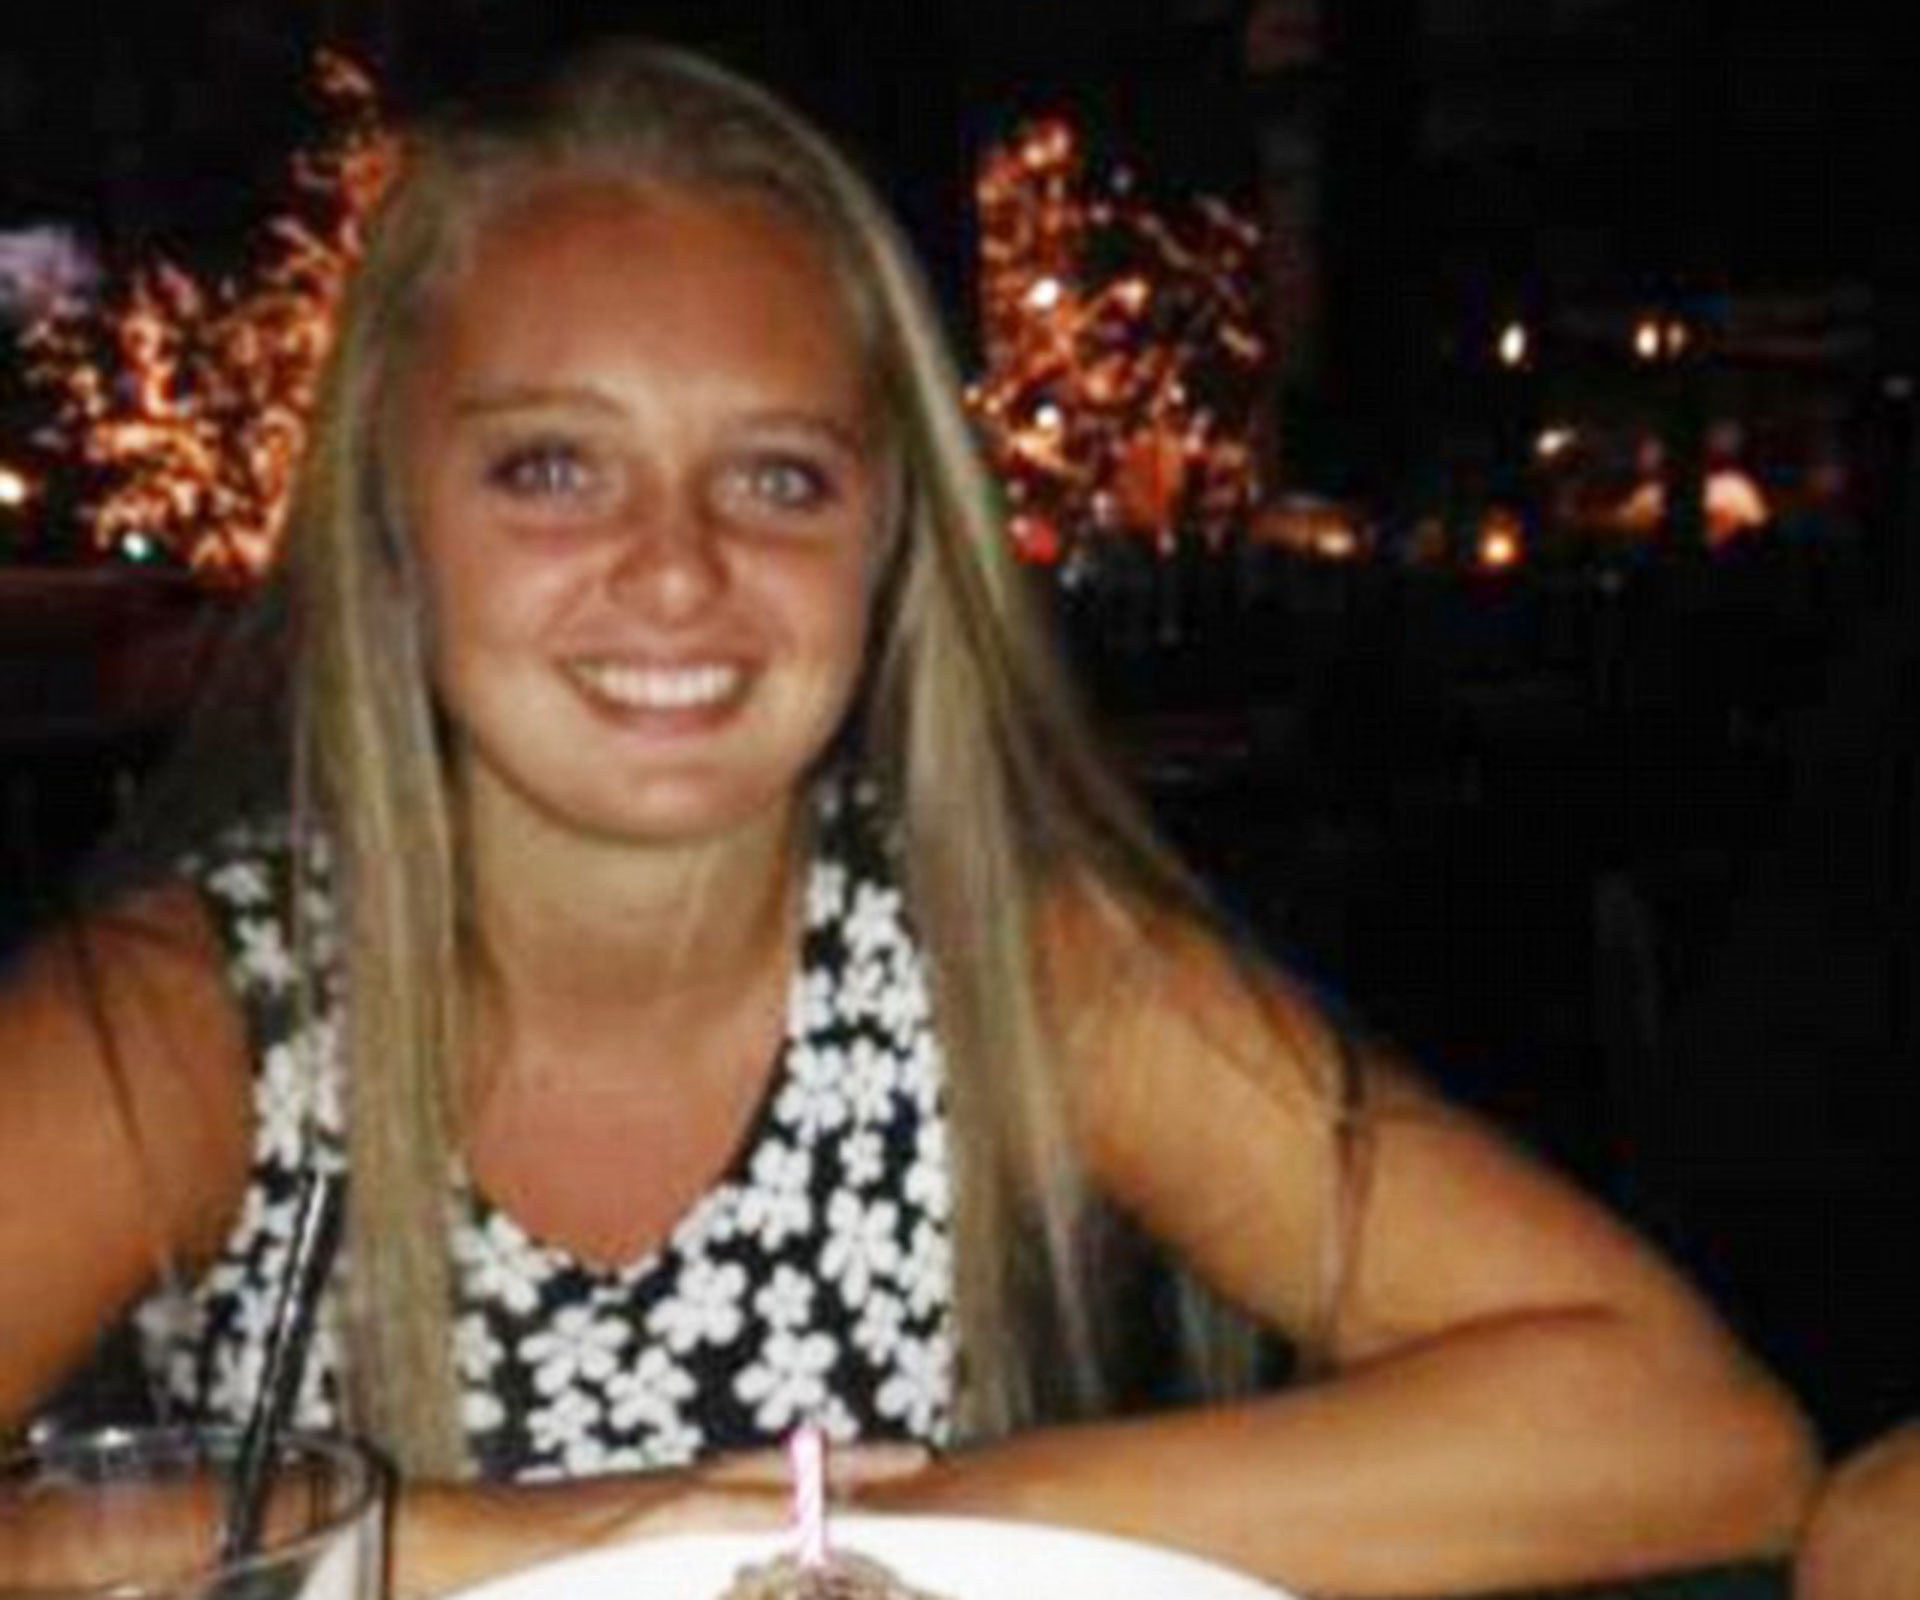 Teen girl charged with manslaughter over cruel texts